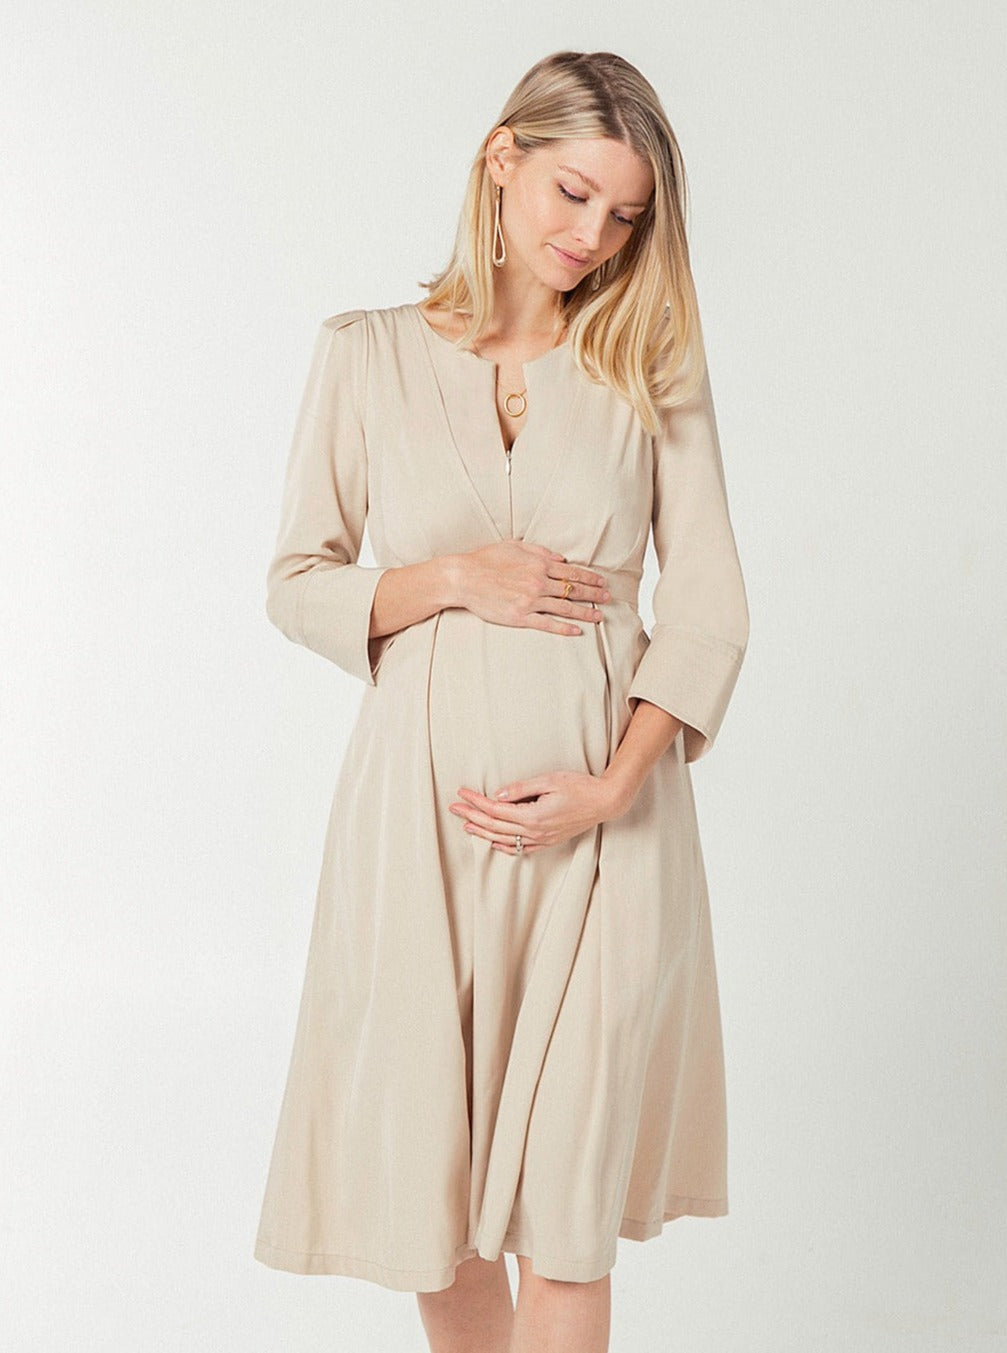 MARION maternity to nursing luxury TENCEL dress with empire waist, zipper breastfeeding access, and full skirt with pockets. Sustainable. Beige or black colors.